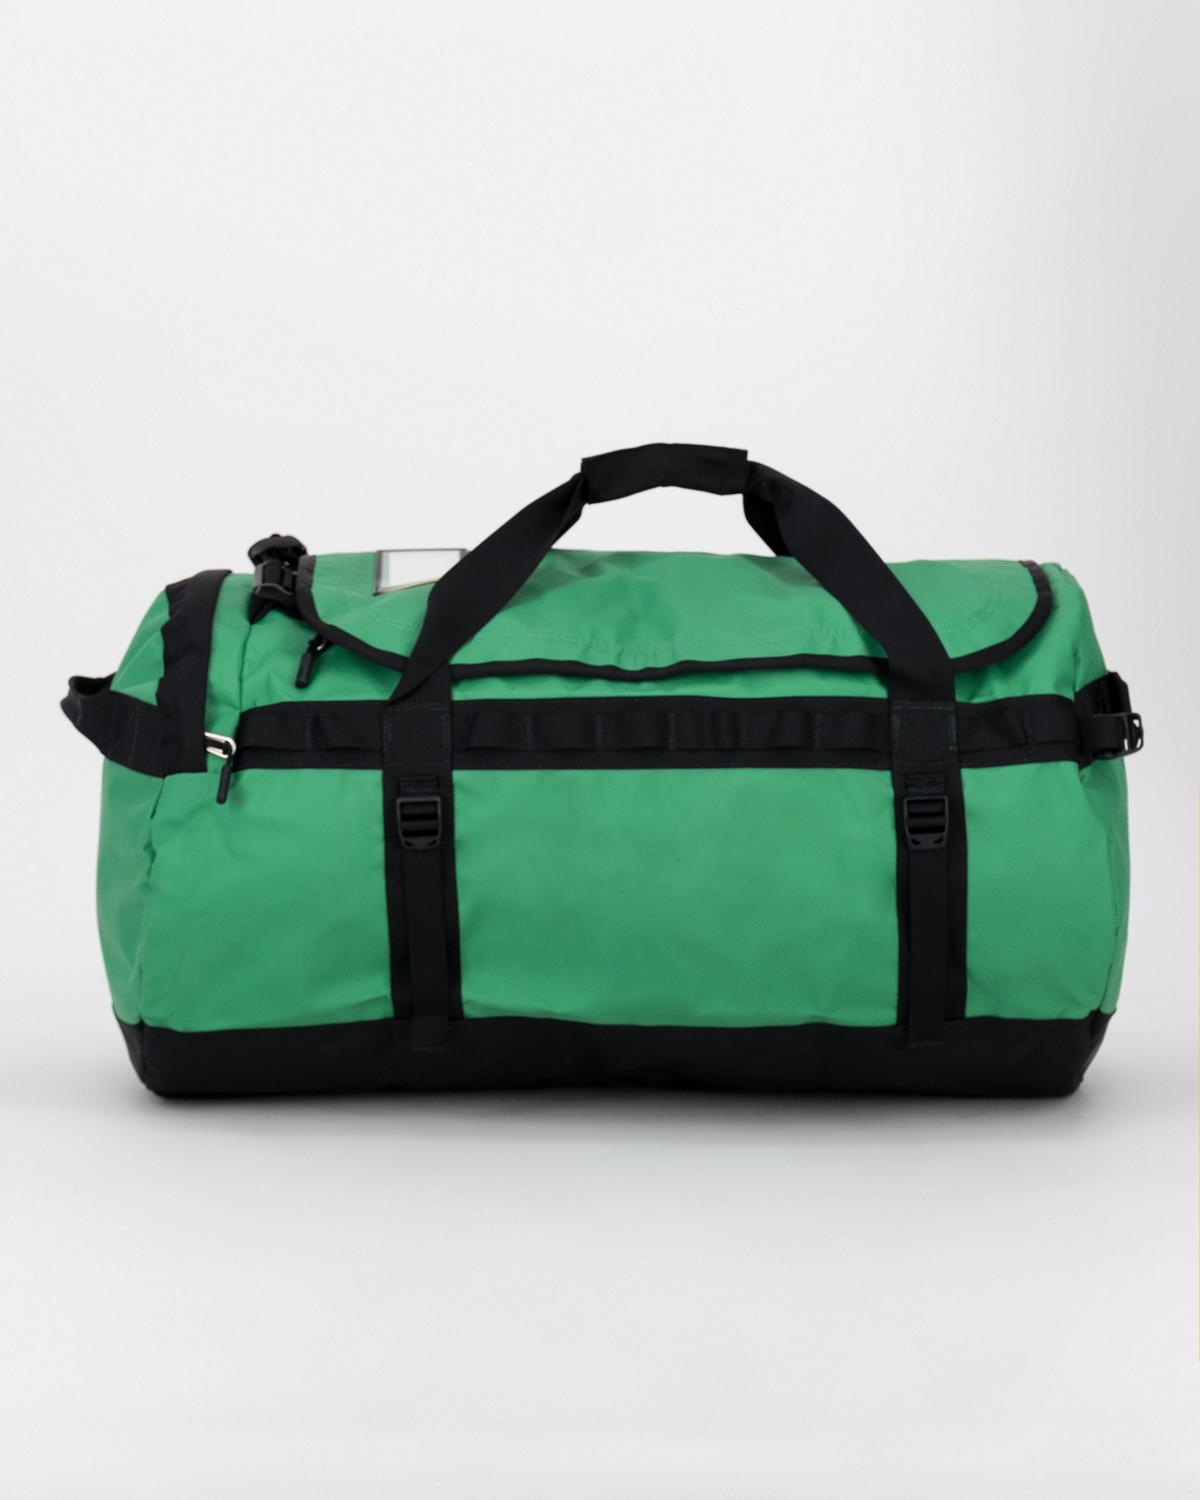 The North Face Large Base Camp Duffel Bag -  Green